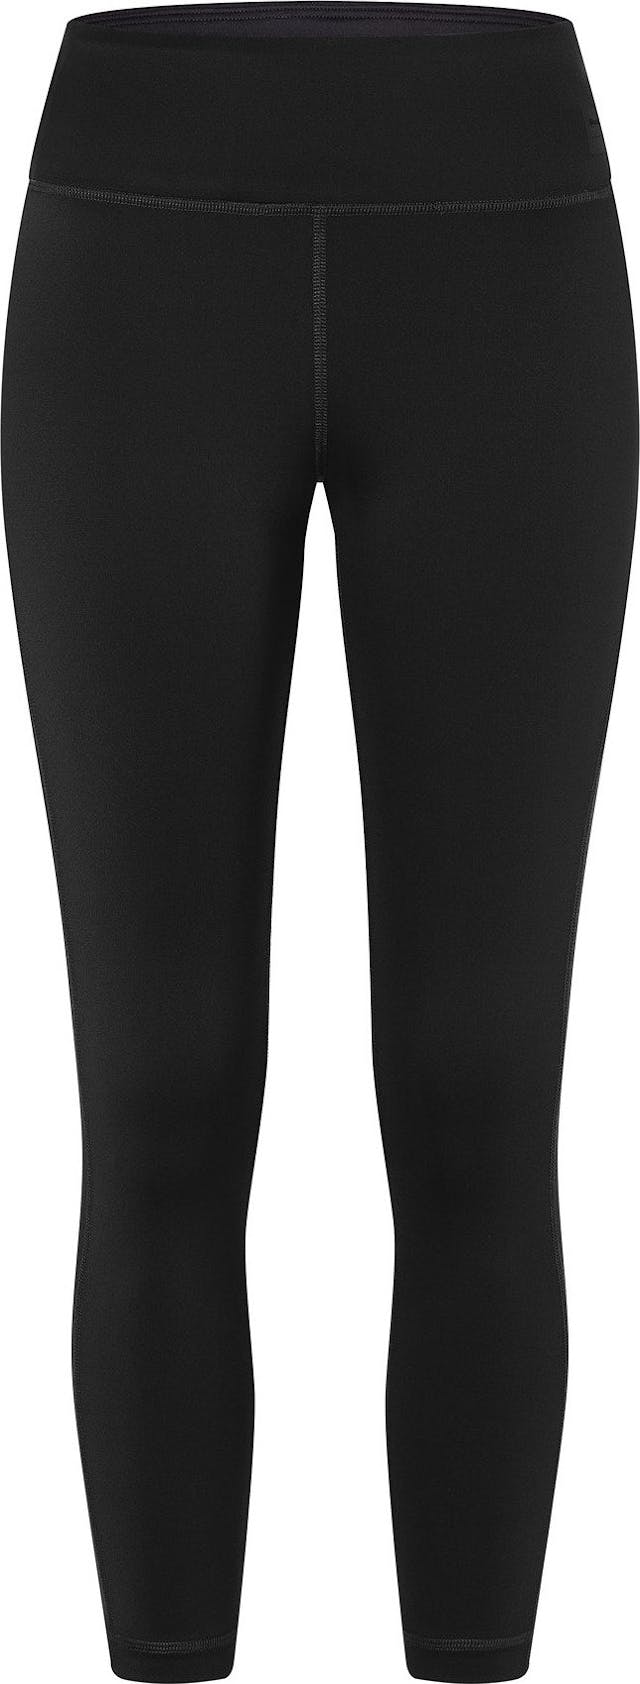 Product image for Rise Pants - Women's